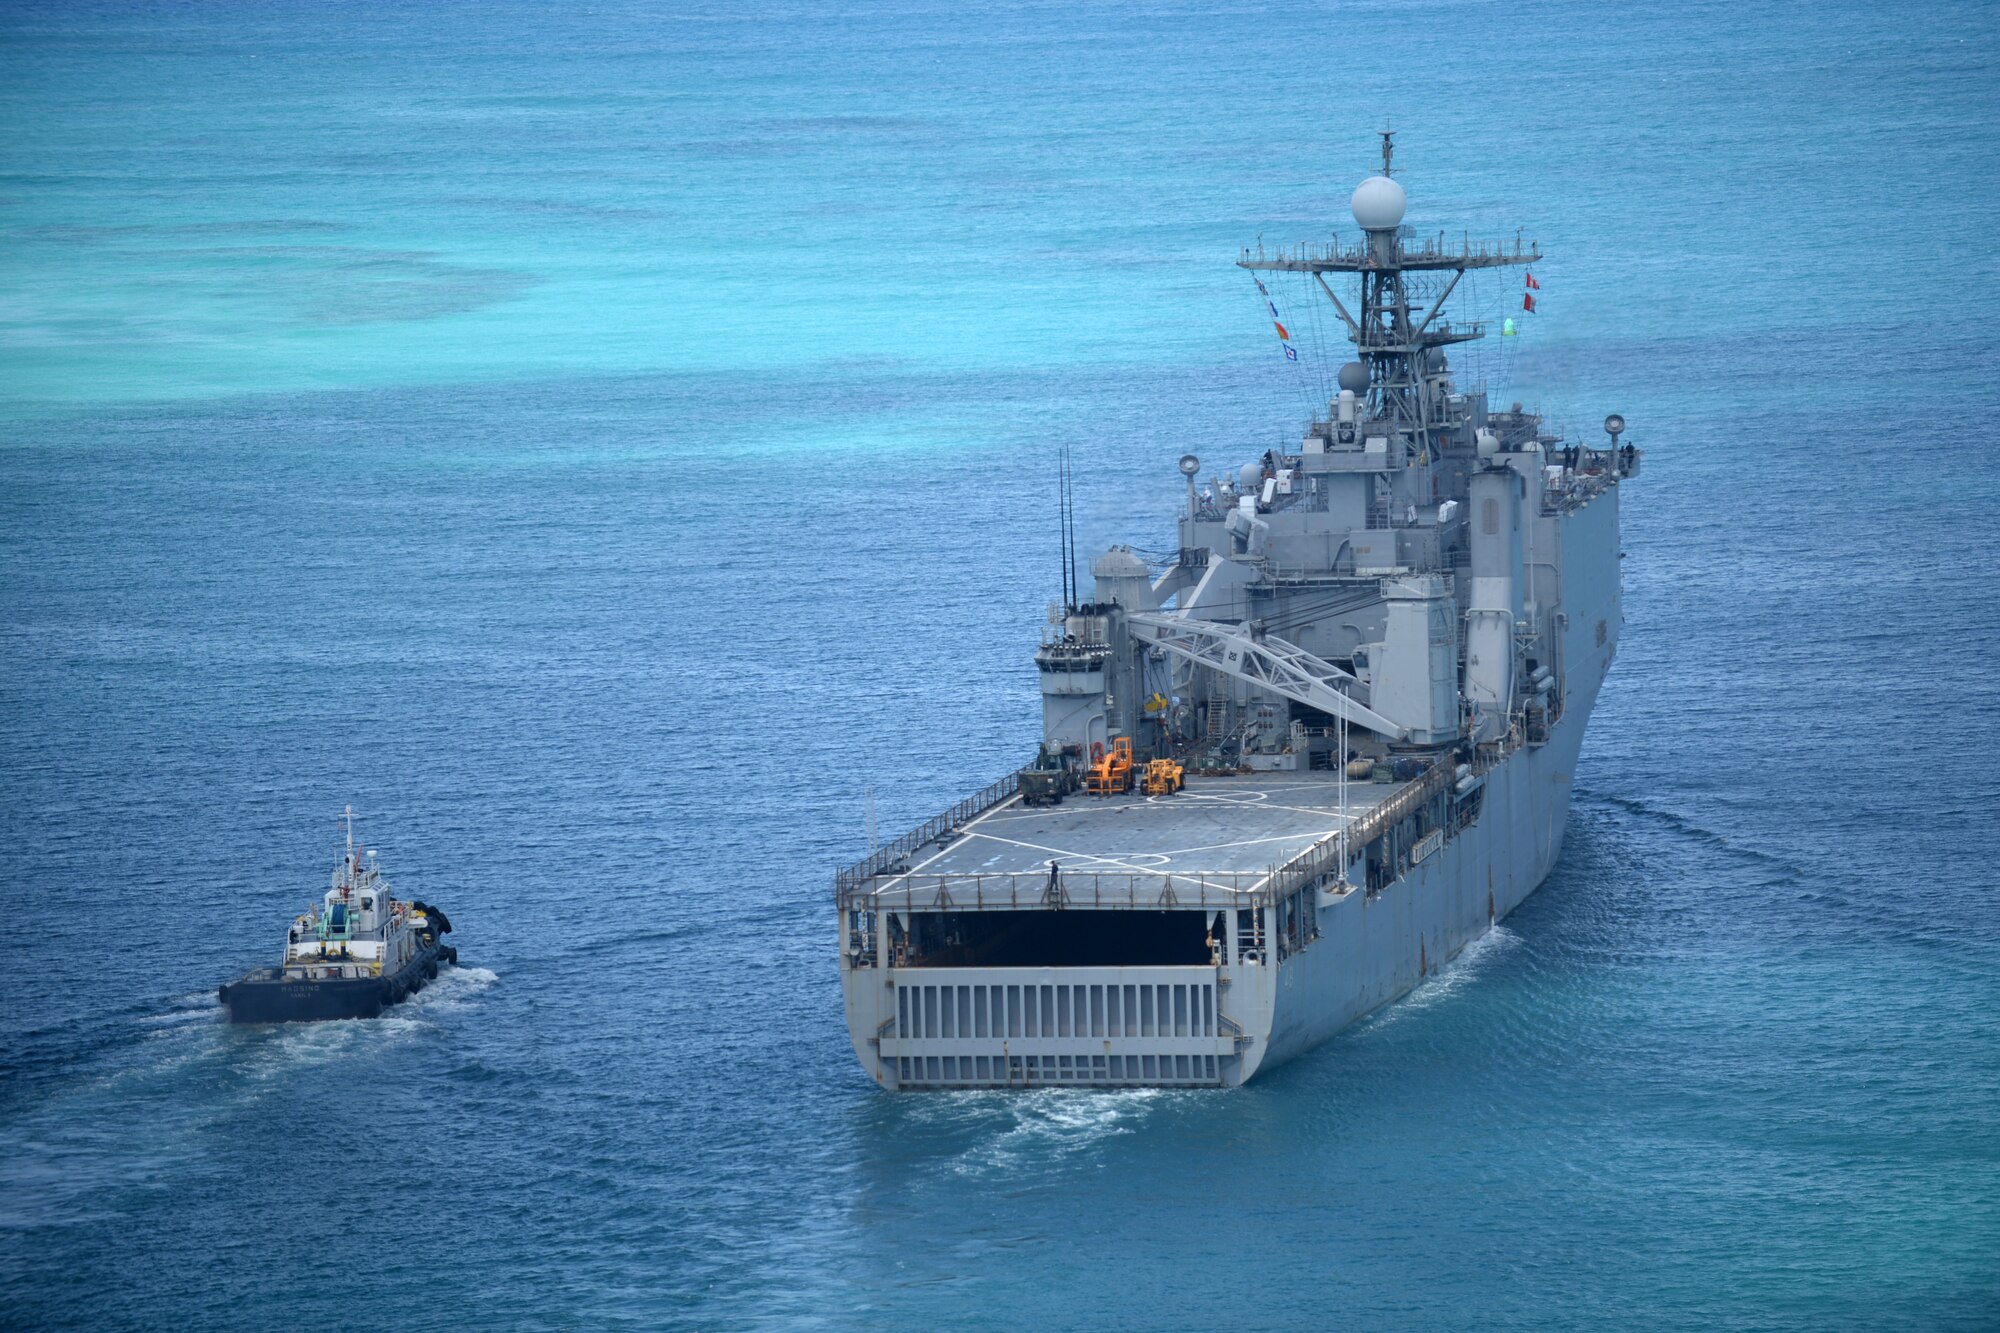 The USS Ashland sails along the coast of Saipan Aug. 9, 2015. The 48 square mile island was battered by Typhoon Soudelor Aug. 2, as the powerful storm made its way across the Pacific. The USS Ashland arrived to the island Aug. 7 to assist in storm recovery efforts. Numerous agencies are contributing to the relief effort including service members from the 36th Contingency Response Group, Helicopter Sea Combat Squadron Two Five and Marine Medium Tiltrotor Squadron 265 (Reinforced), 31st Marine Expeditionary Unit. (U.S. Air Force photo by Senior Airman Joshua Smoot/Released)